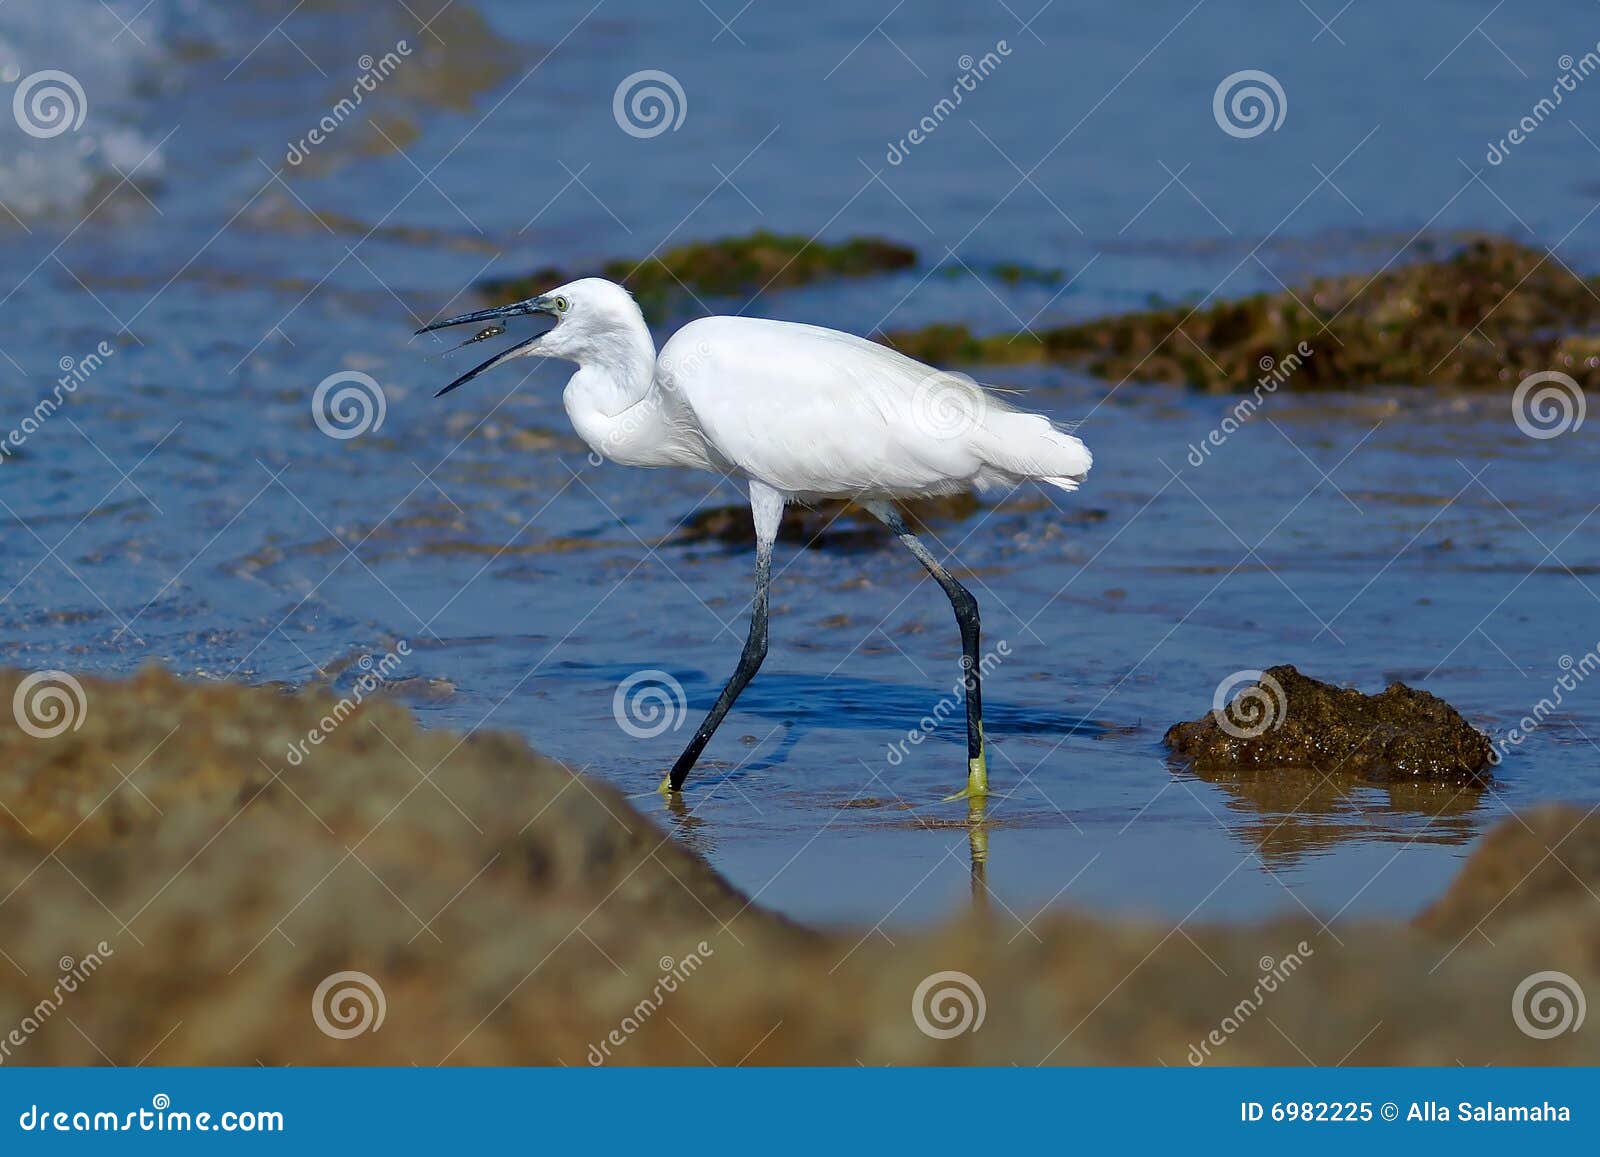 The heron having meal stock image. Image of greece, feathers - 6982225